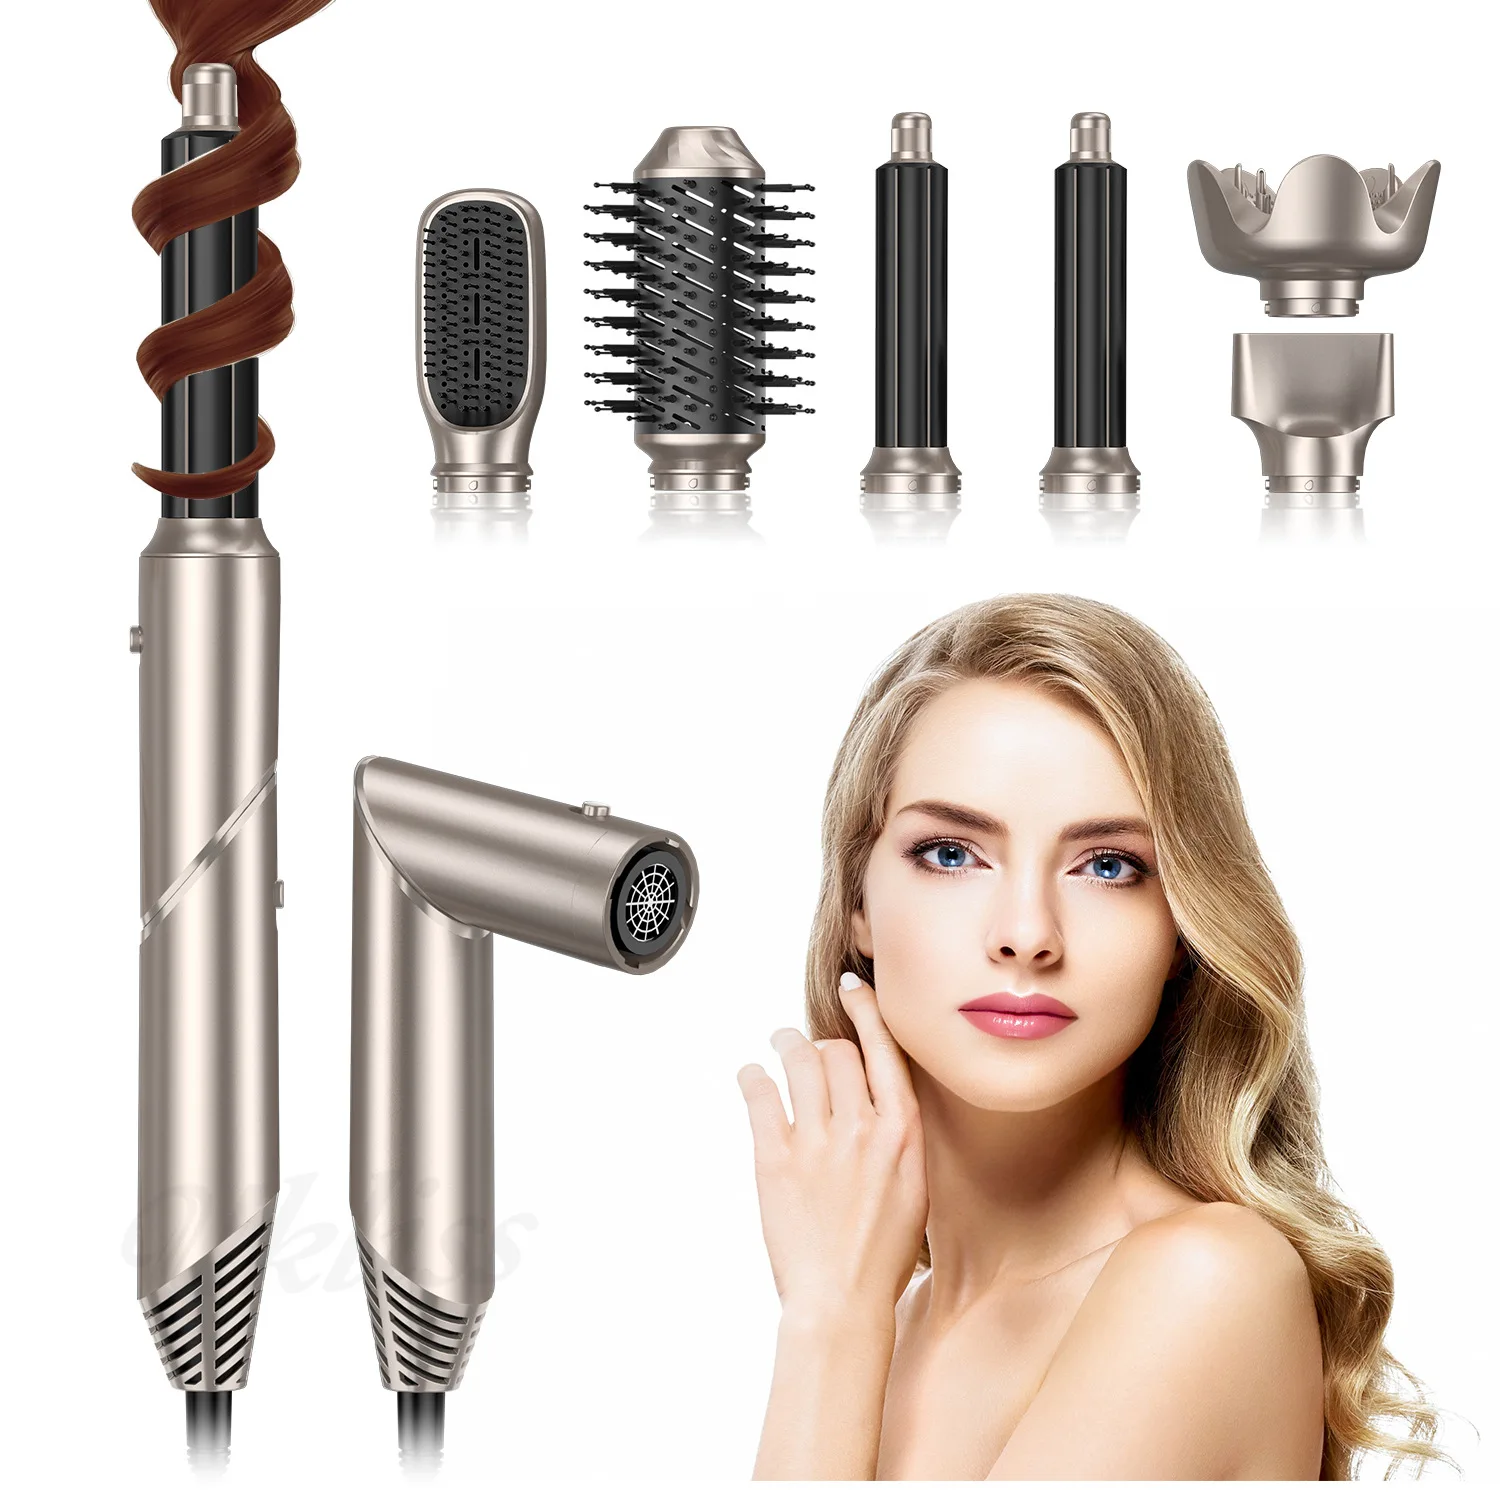 High-speed 6-in-1 Folding Hot Air Comb Automatic Curling Iron Curling Straight Dual Purpose Styling Comb Electric Hair Dryer dt2236c digital tachometer 2 in 1 dual purpose contact non contact speed detector meter auto ranging 2 5 99999rpm